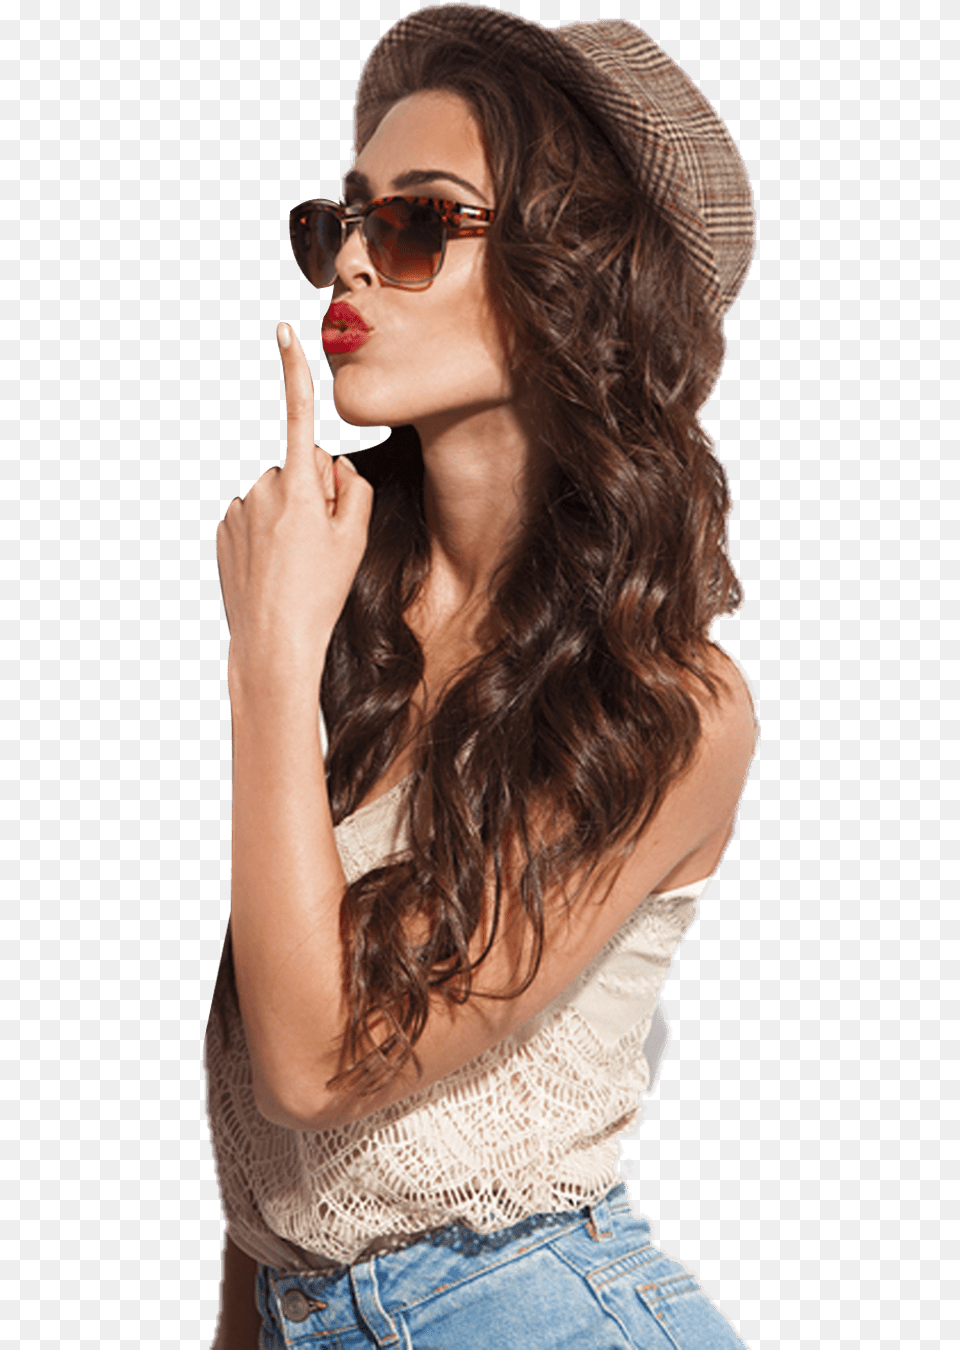 Social Media Selfie Star, Accessories, Sunglasses, Person, Hat Png Image